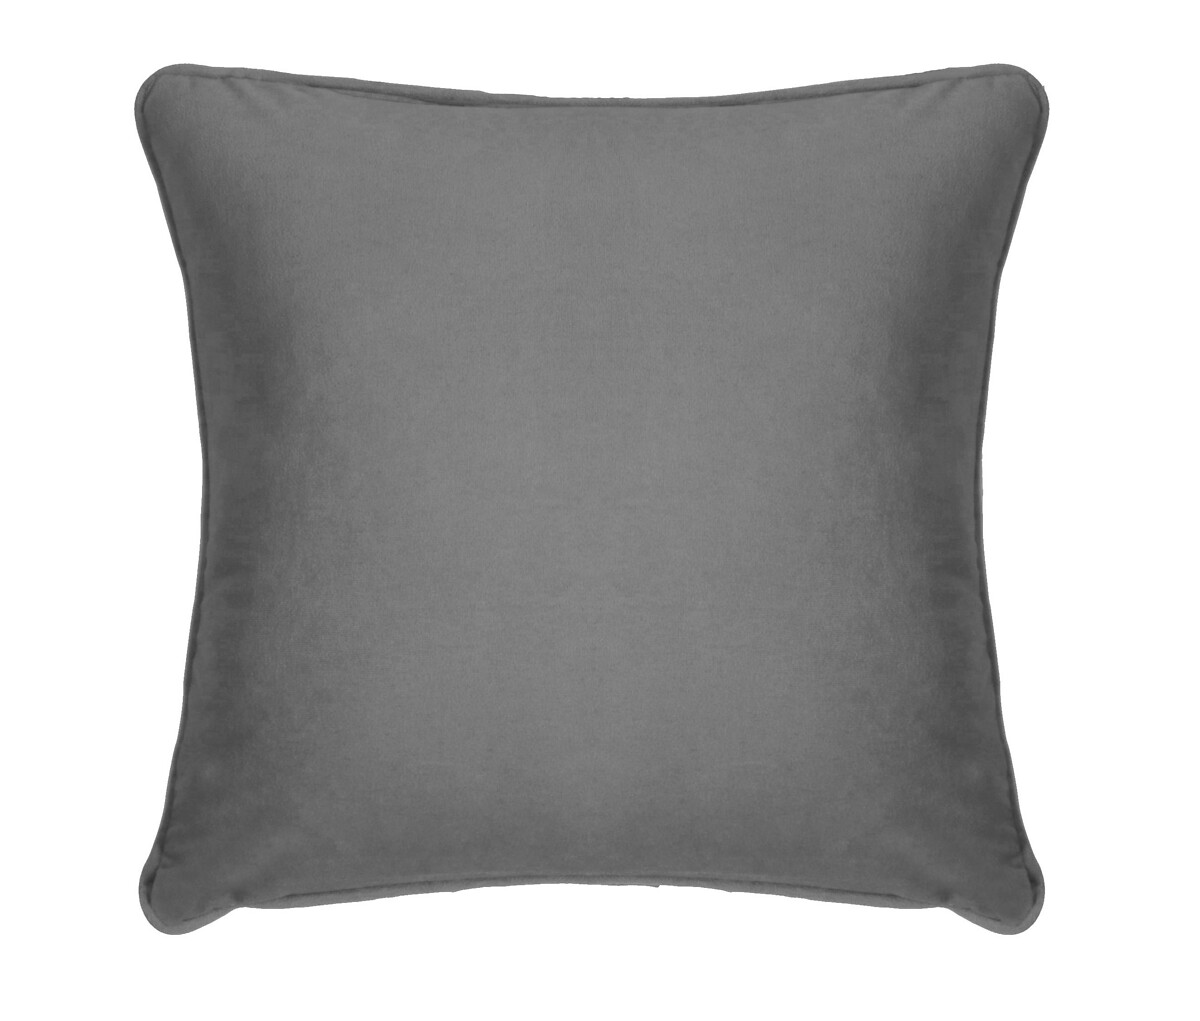 Clever velvet grey filled cushion 44x44cm, grey, So'home | La Redoute